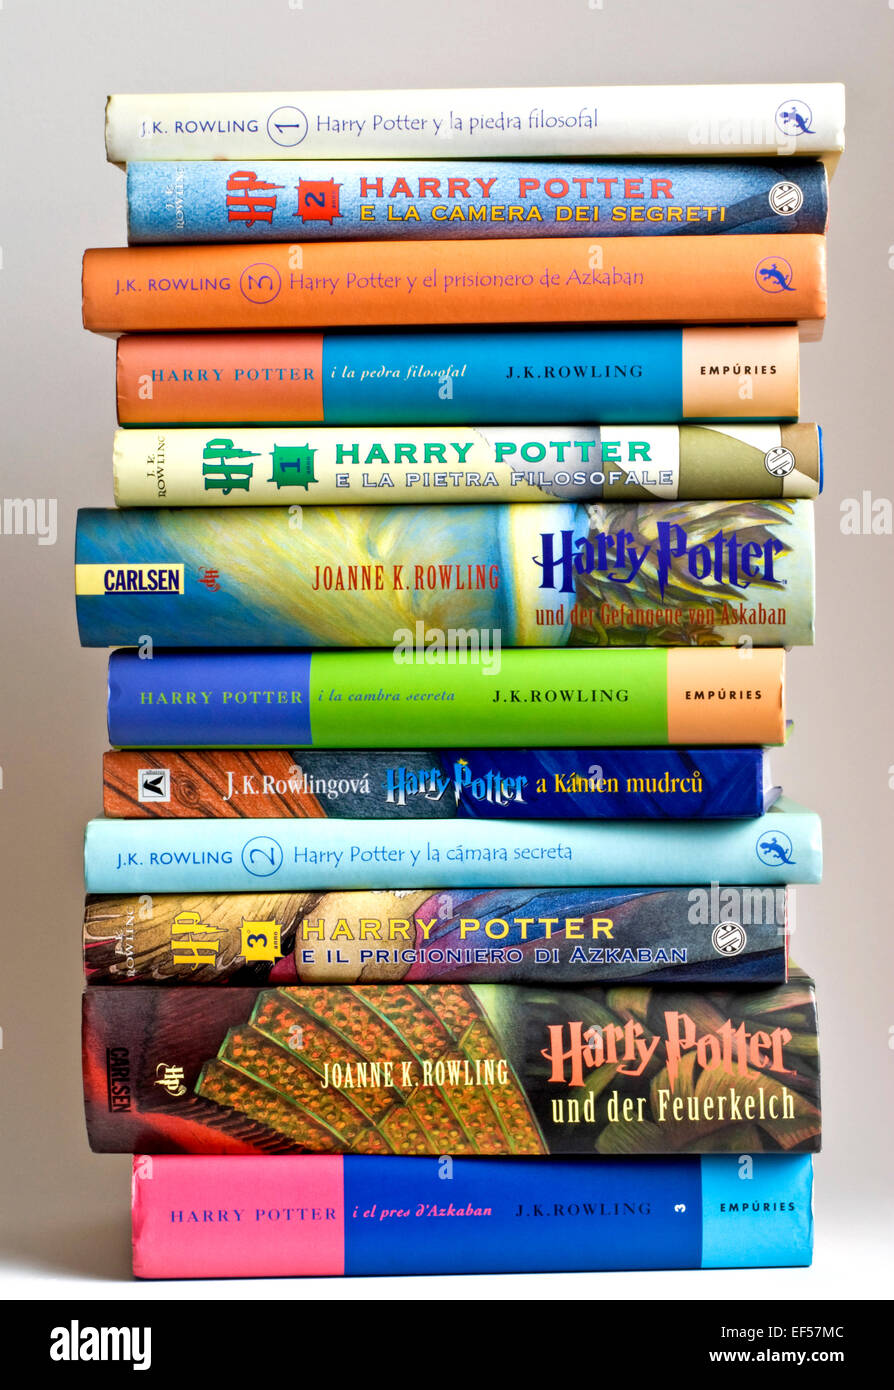 J.K. Rowling's Harry Potter books in foreign translations. Italian, Spanish, German, Catalan and Czech Stock Photo